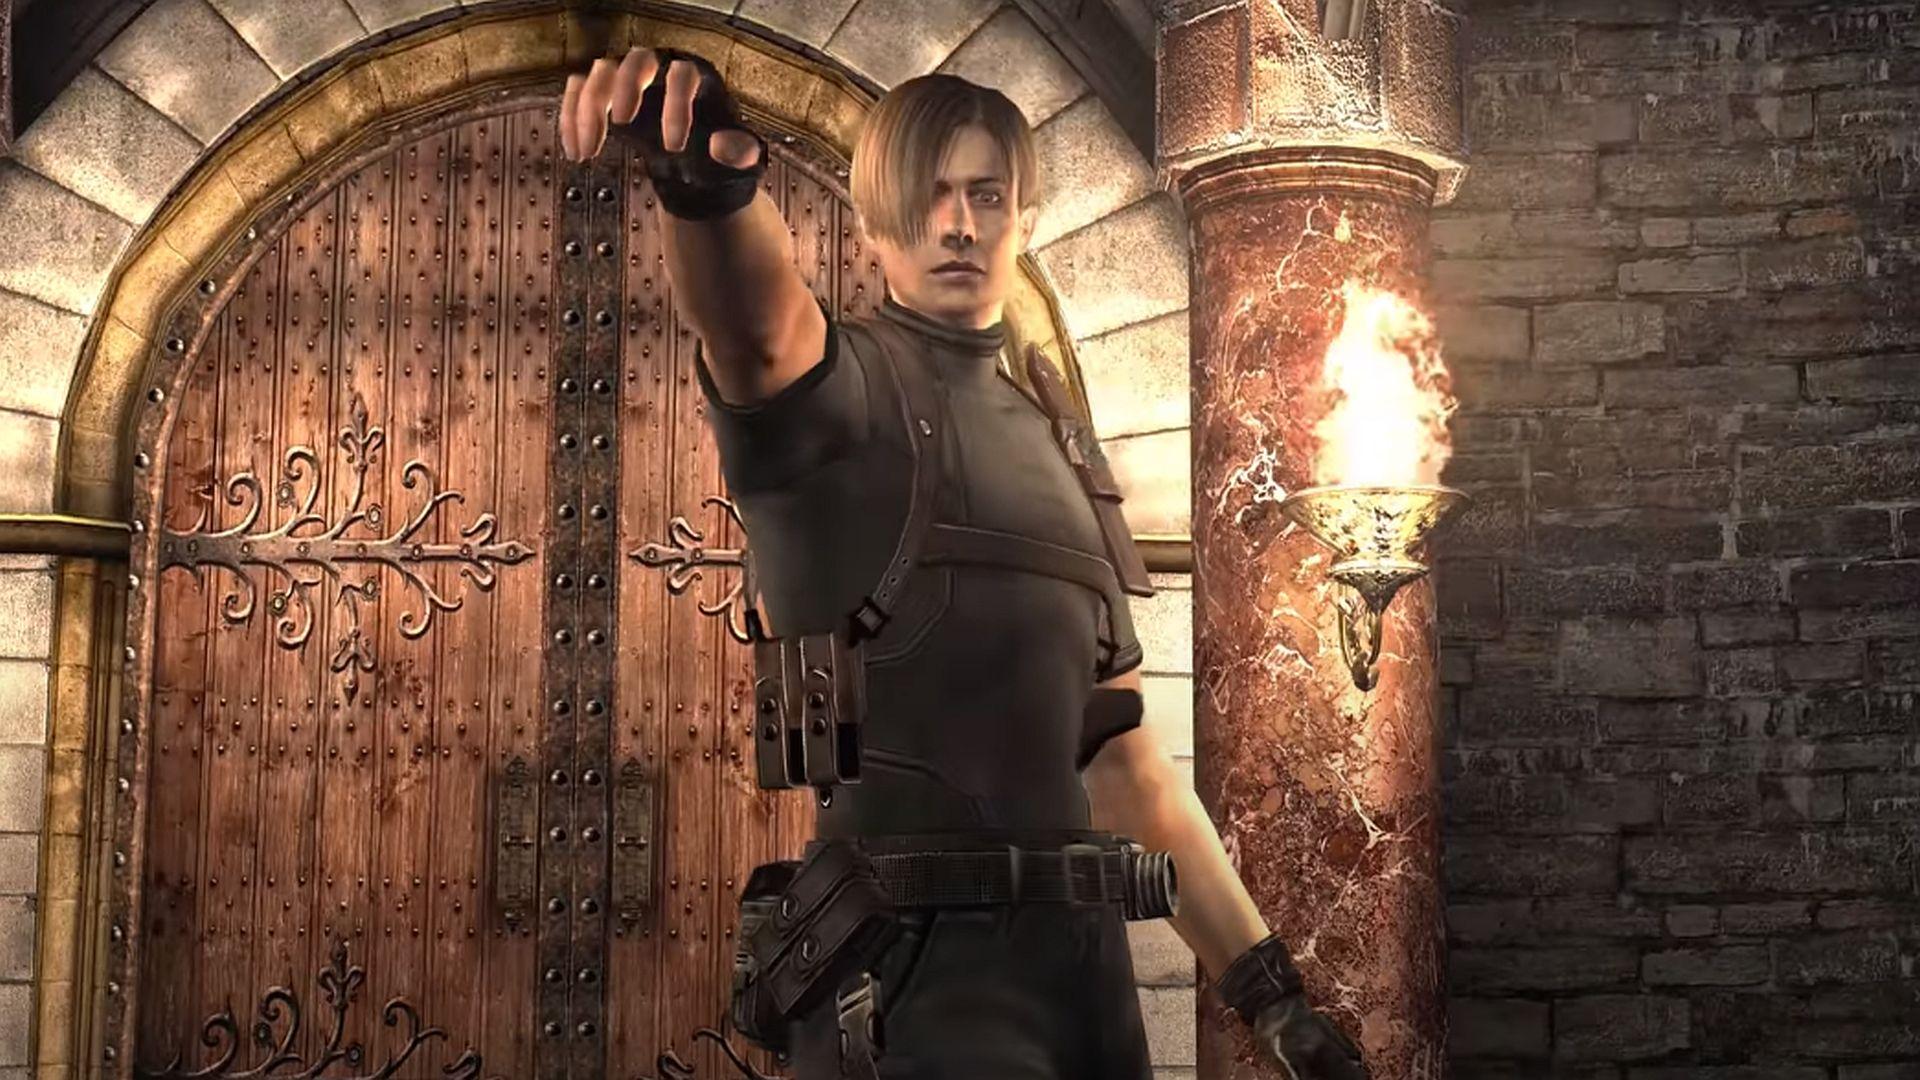 Resident Evil 4 Hd Wallpapers Top Free Resident Evil 4 Hd Backgrounds Wallpaperaccess